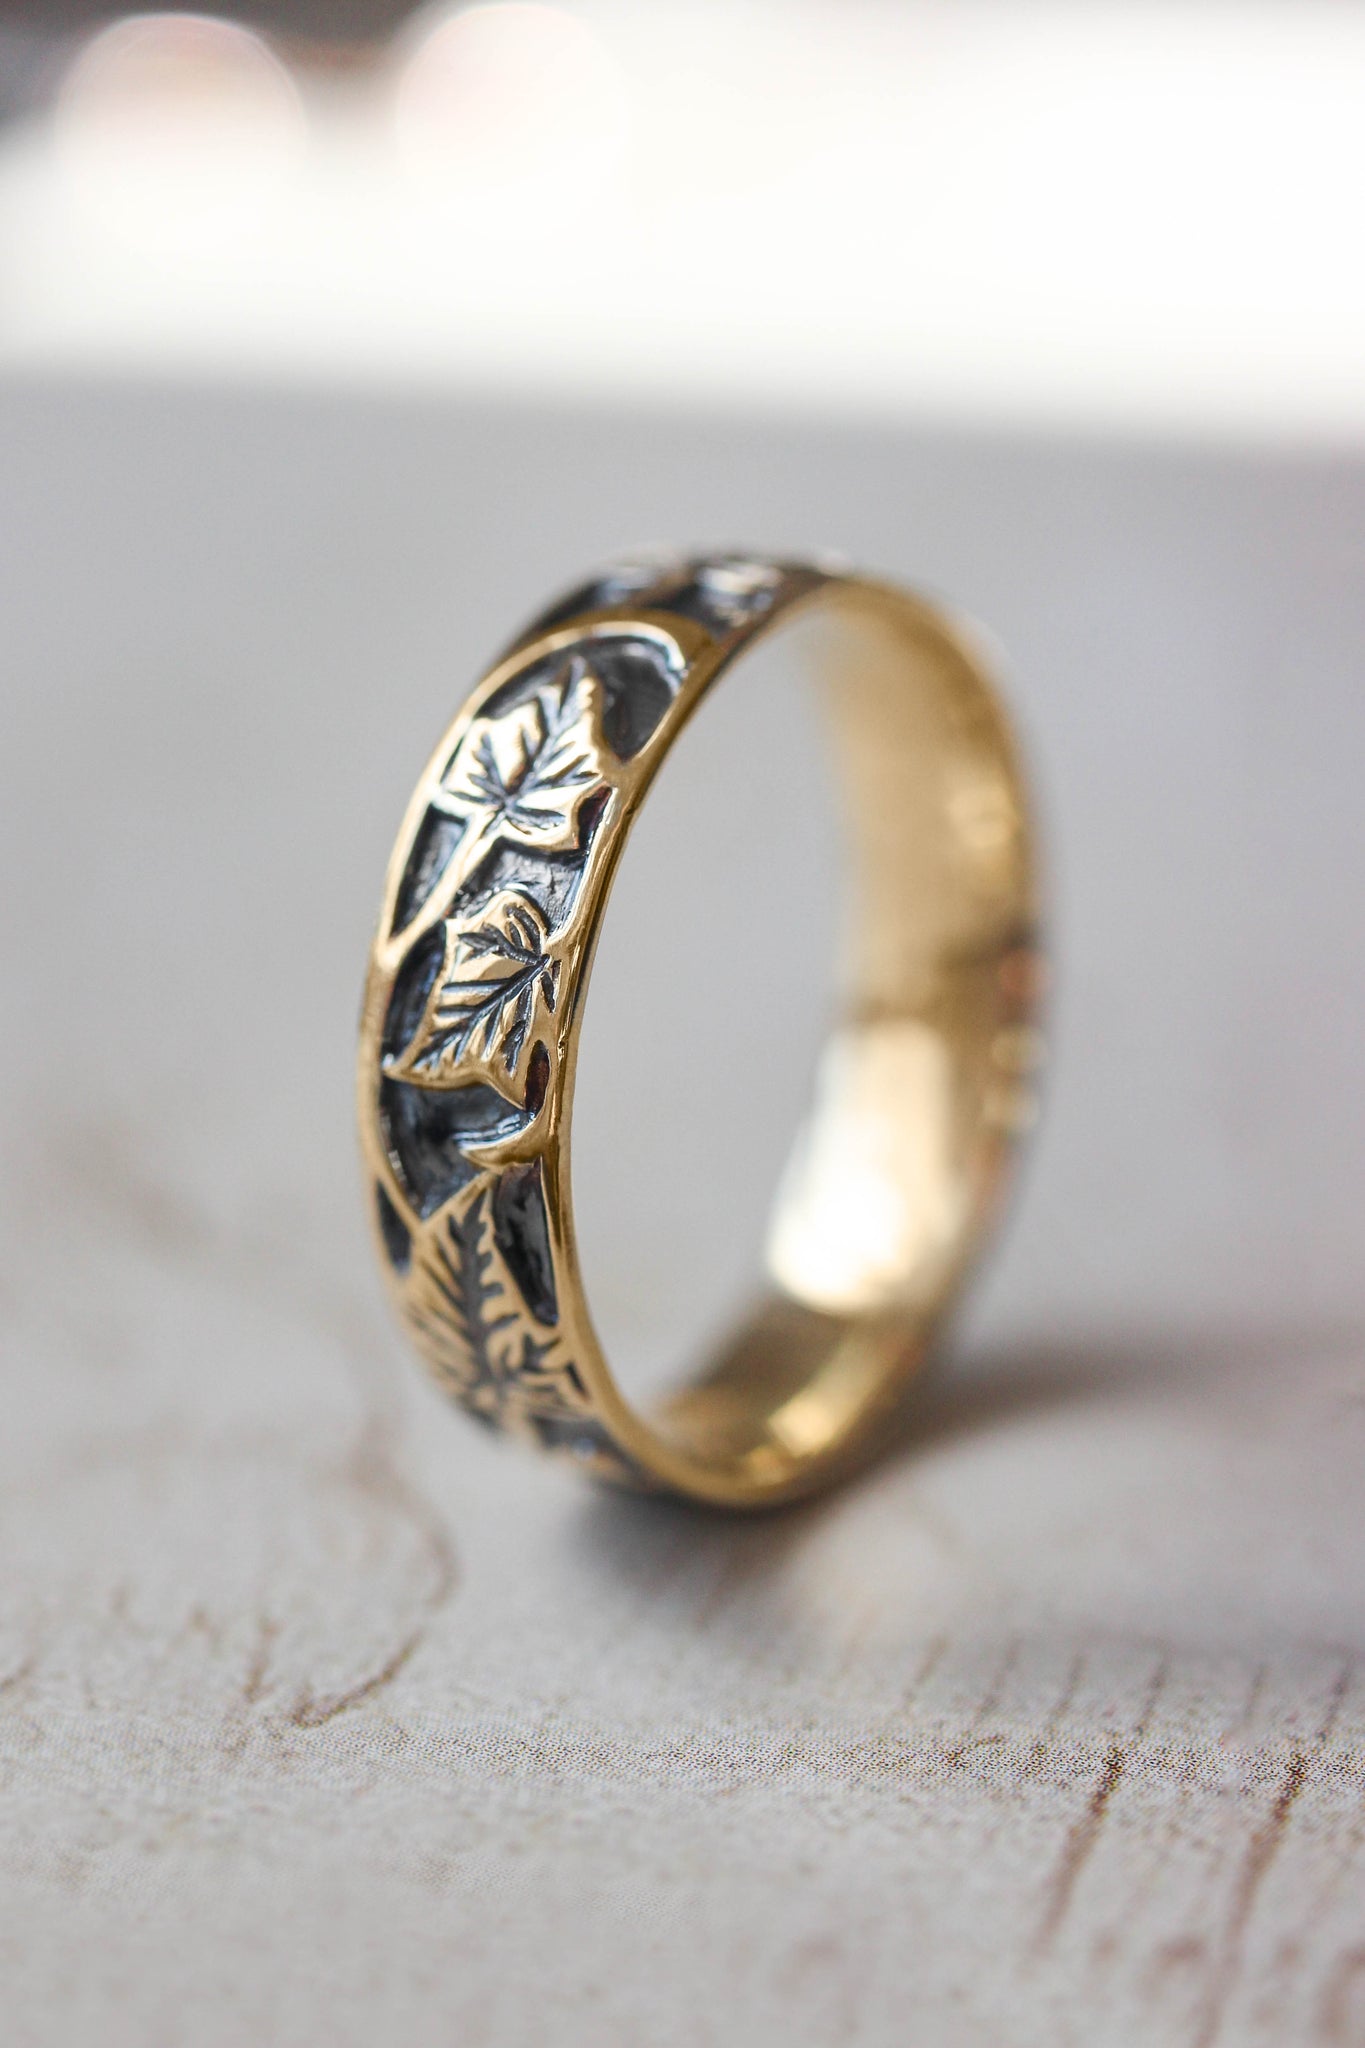 Black and gold wedding band for man, ivy leaves ring - Eden Garden Jewelry™